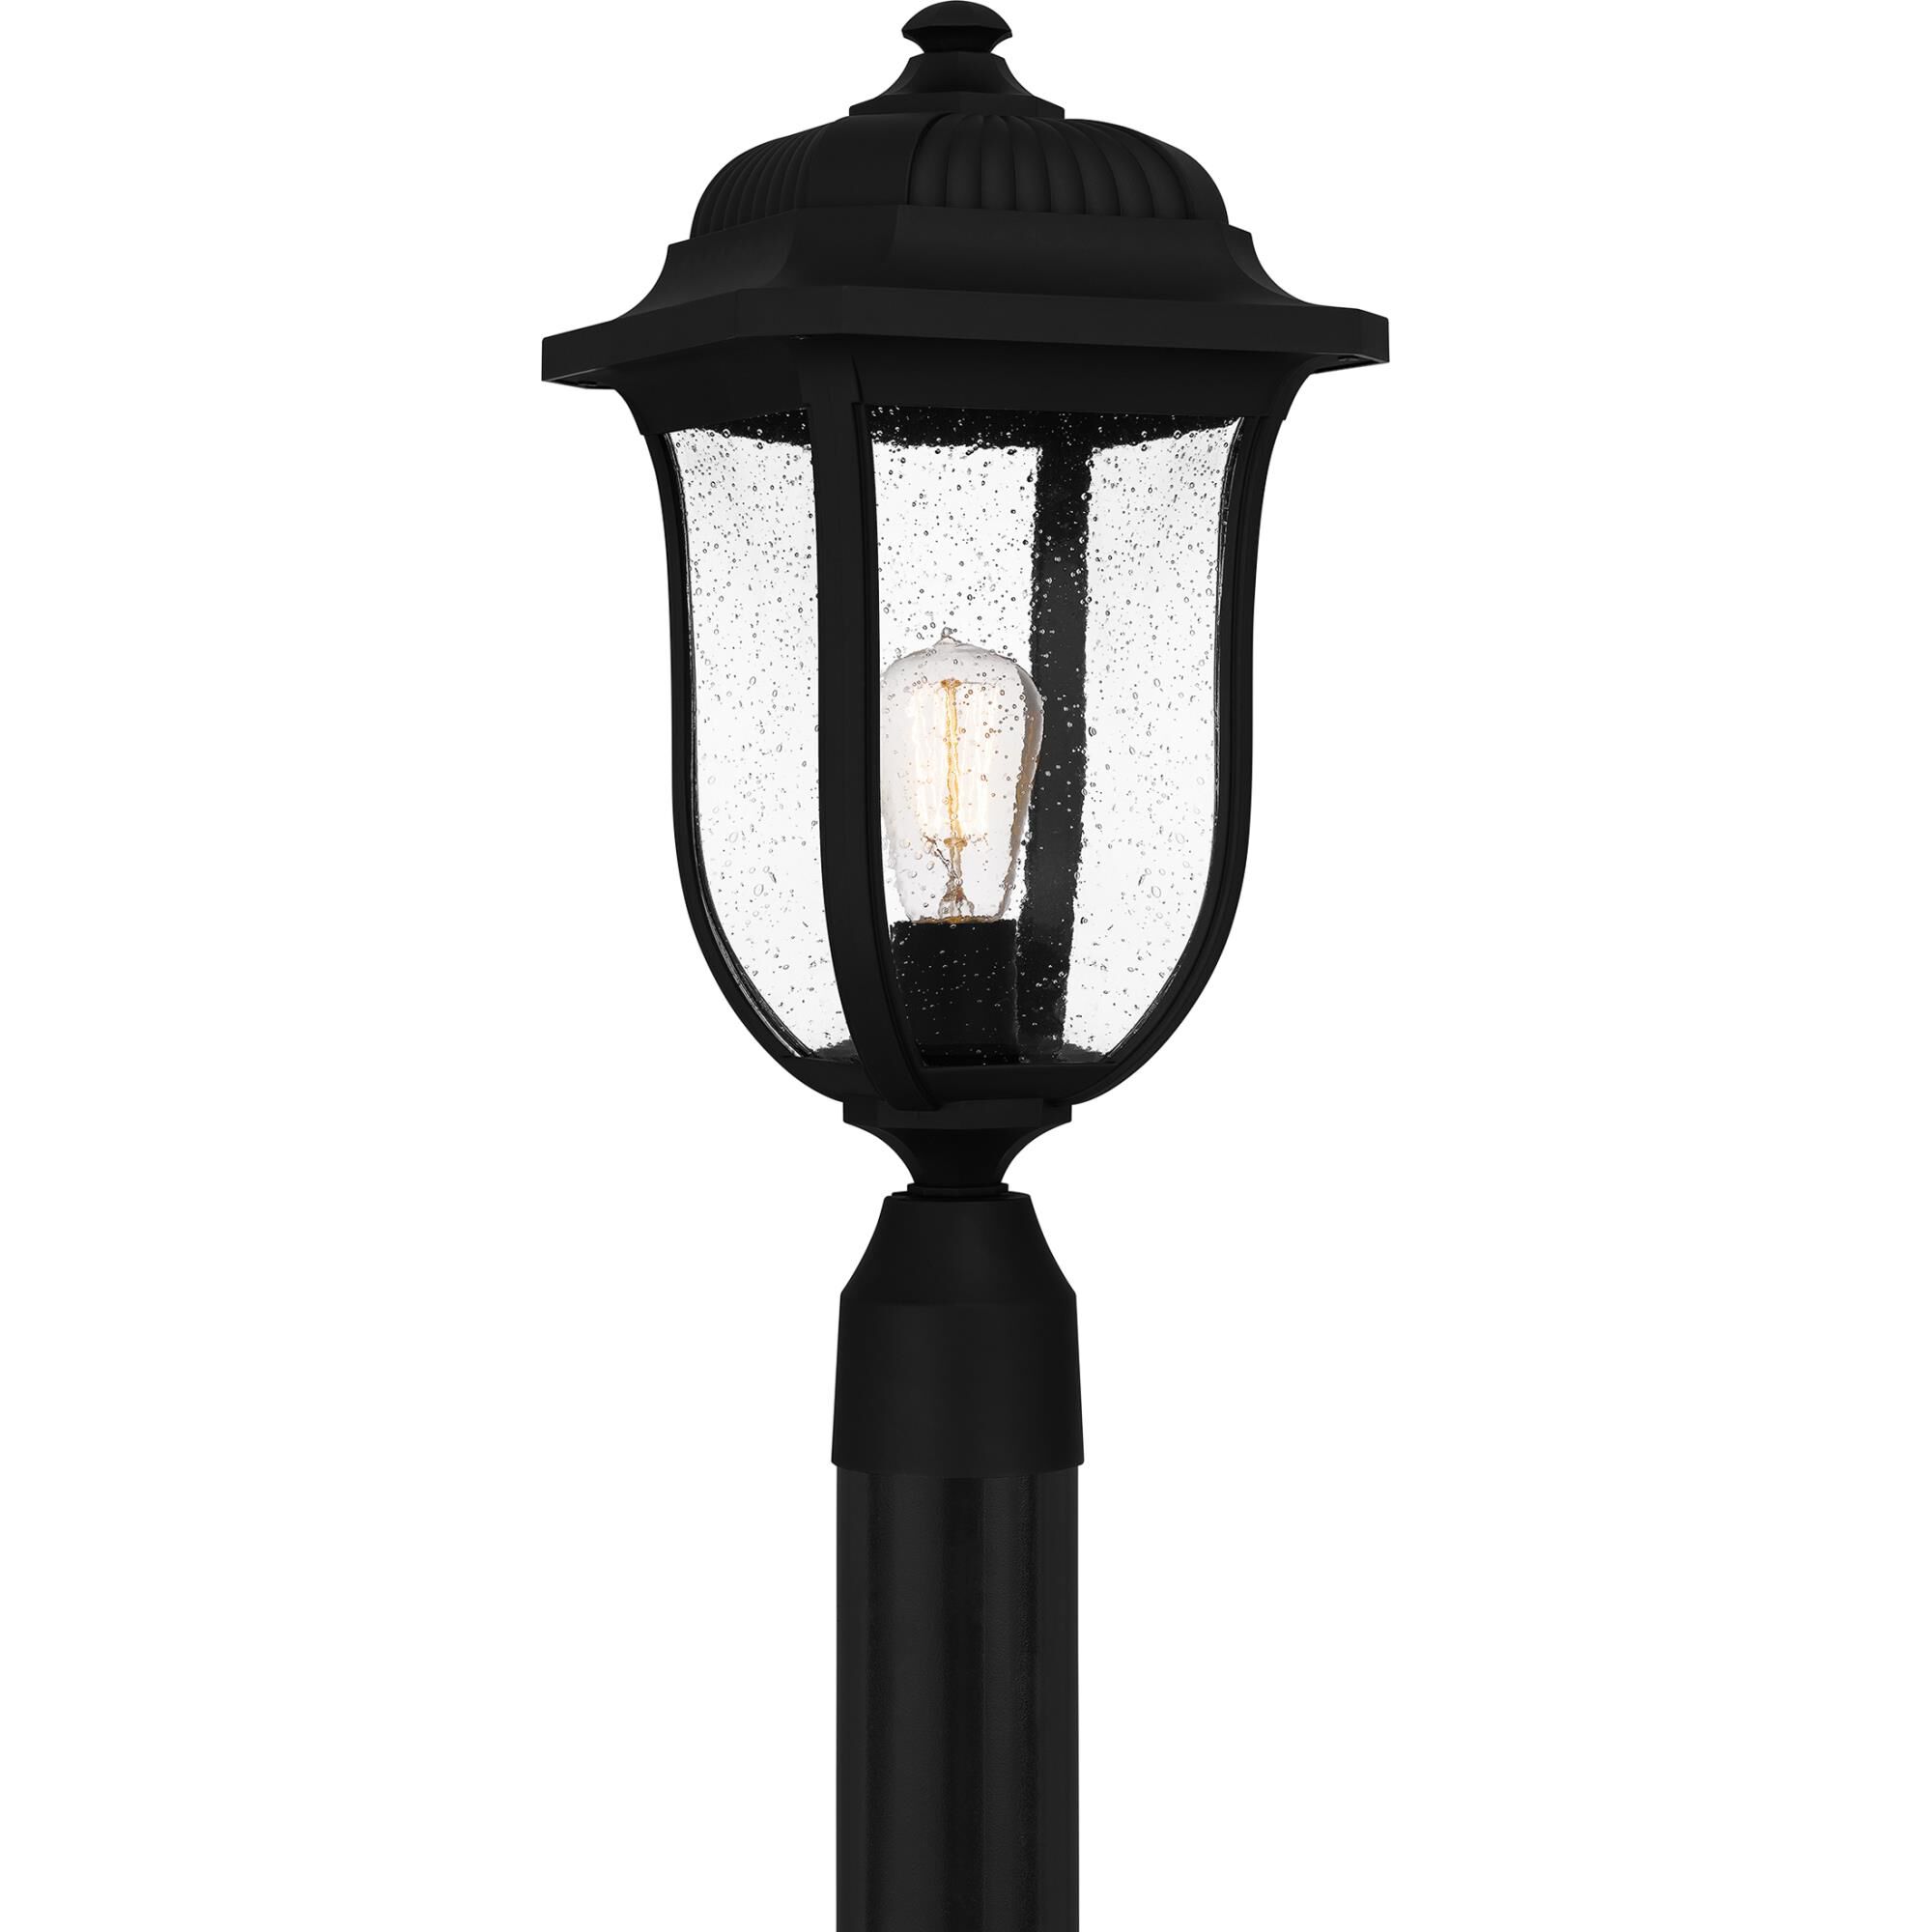 Photos - Floodlight / Street Light Quoizel Mulberry 19 Inch Tall Outdoor Post Lamp Mulberry - MUL9009MBK - Tr 